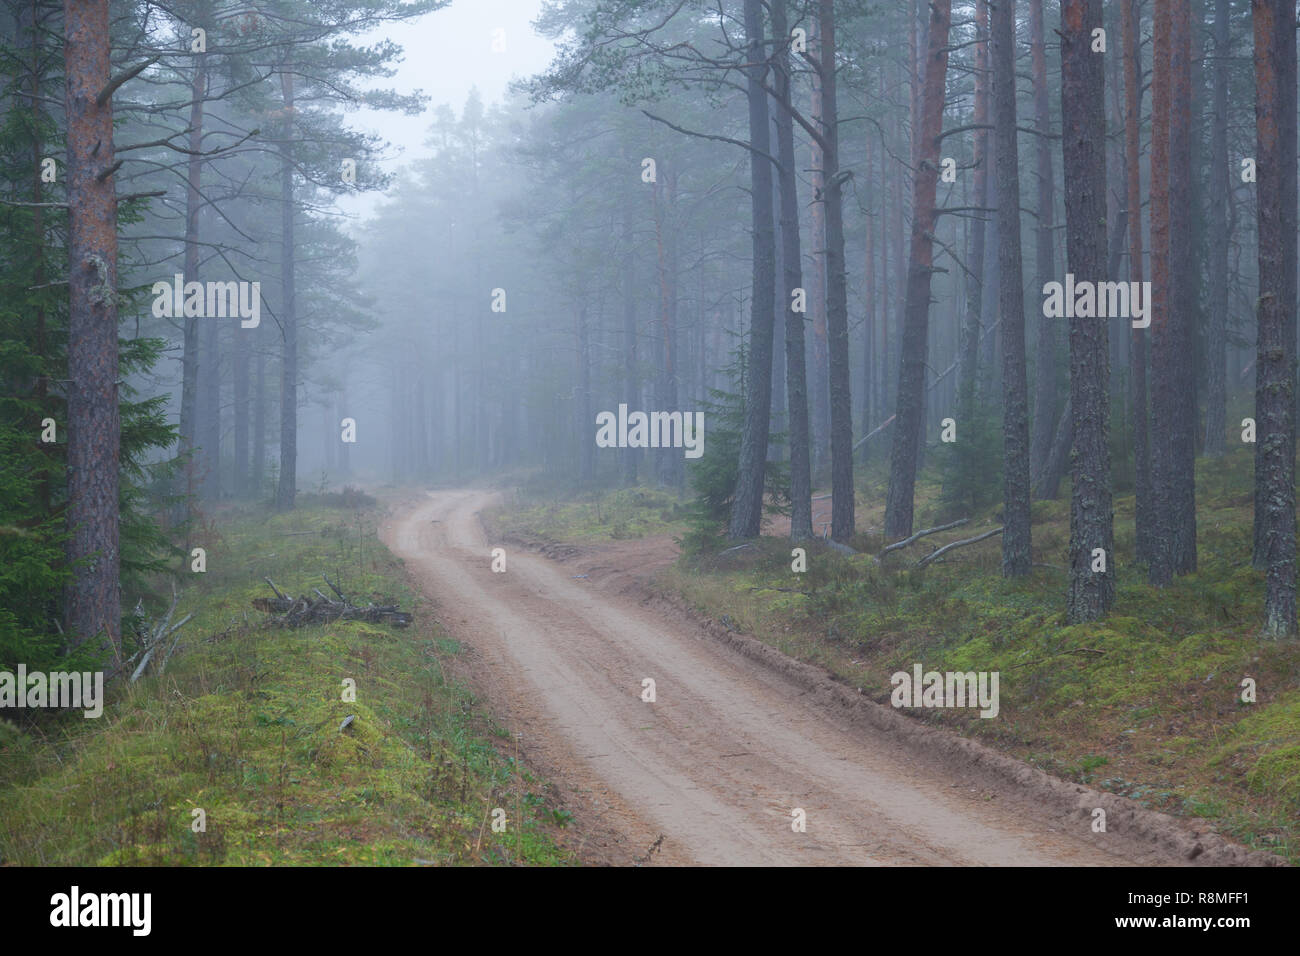 Morning fog and sandy road in a pine forest Stock Photo